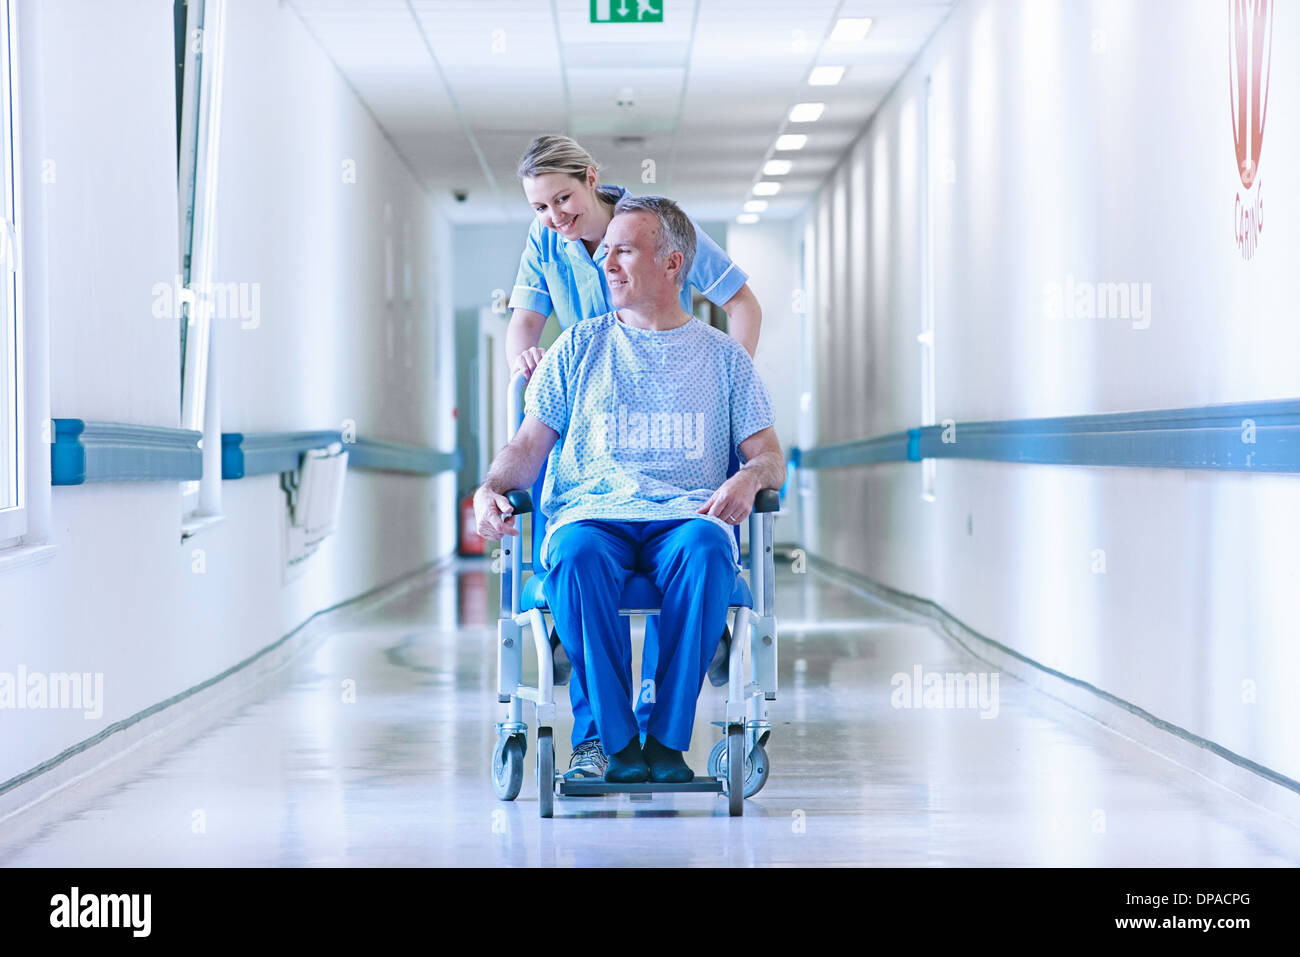 Nurse pushing patient in wheelchair down corridor Banque D'Images